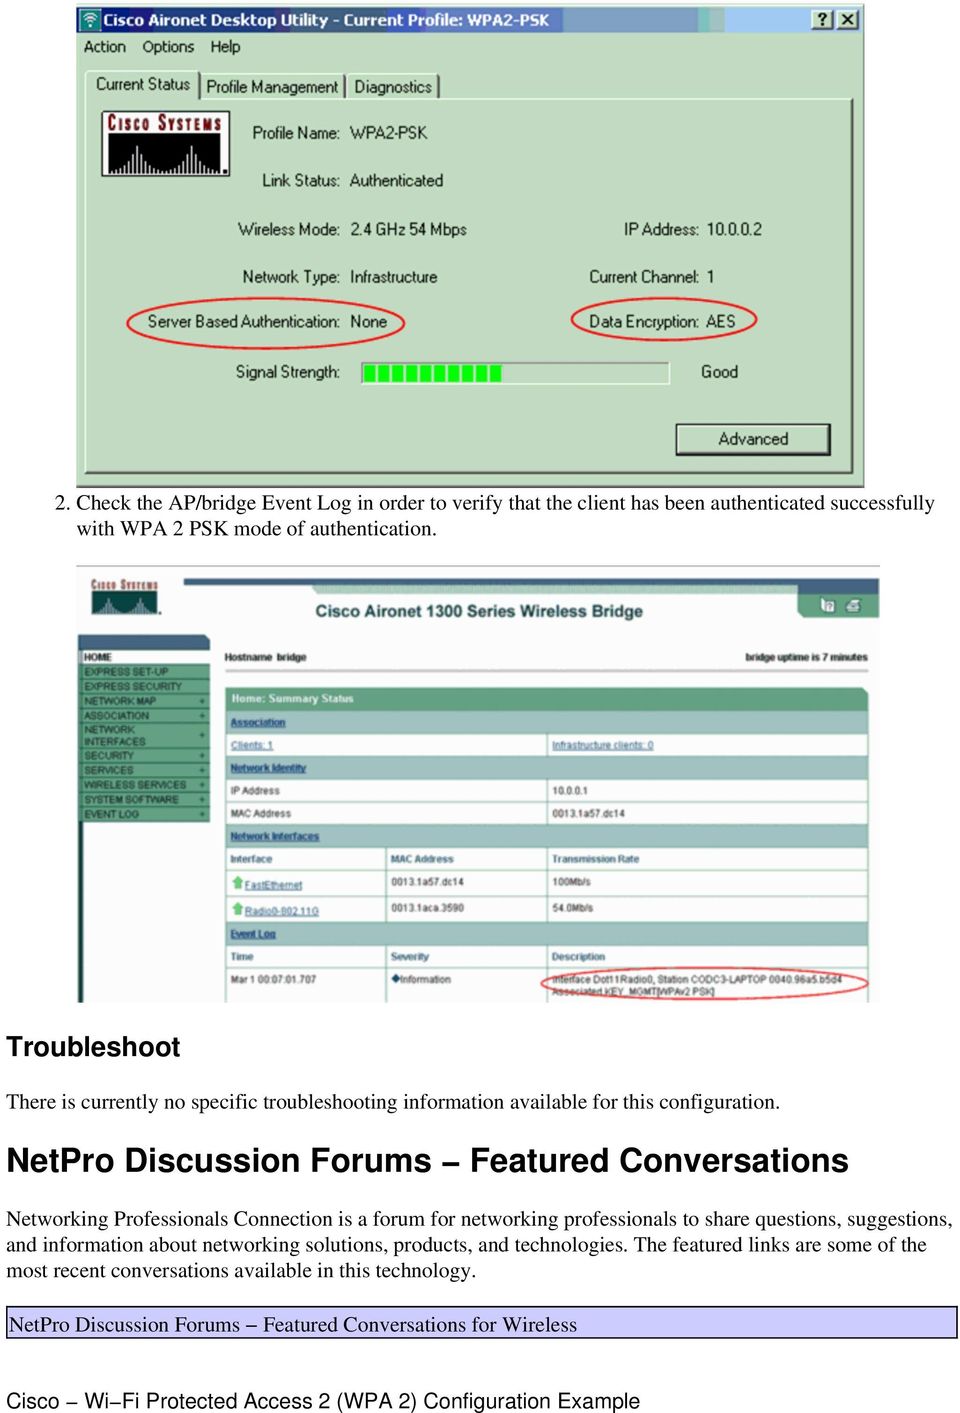 NetPro Discussion Forums Featured Conversations Networking Professionals Connection is a forum for networking professionals to share questions, suggestions,